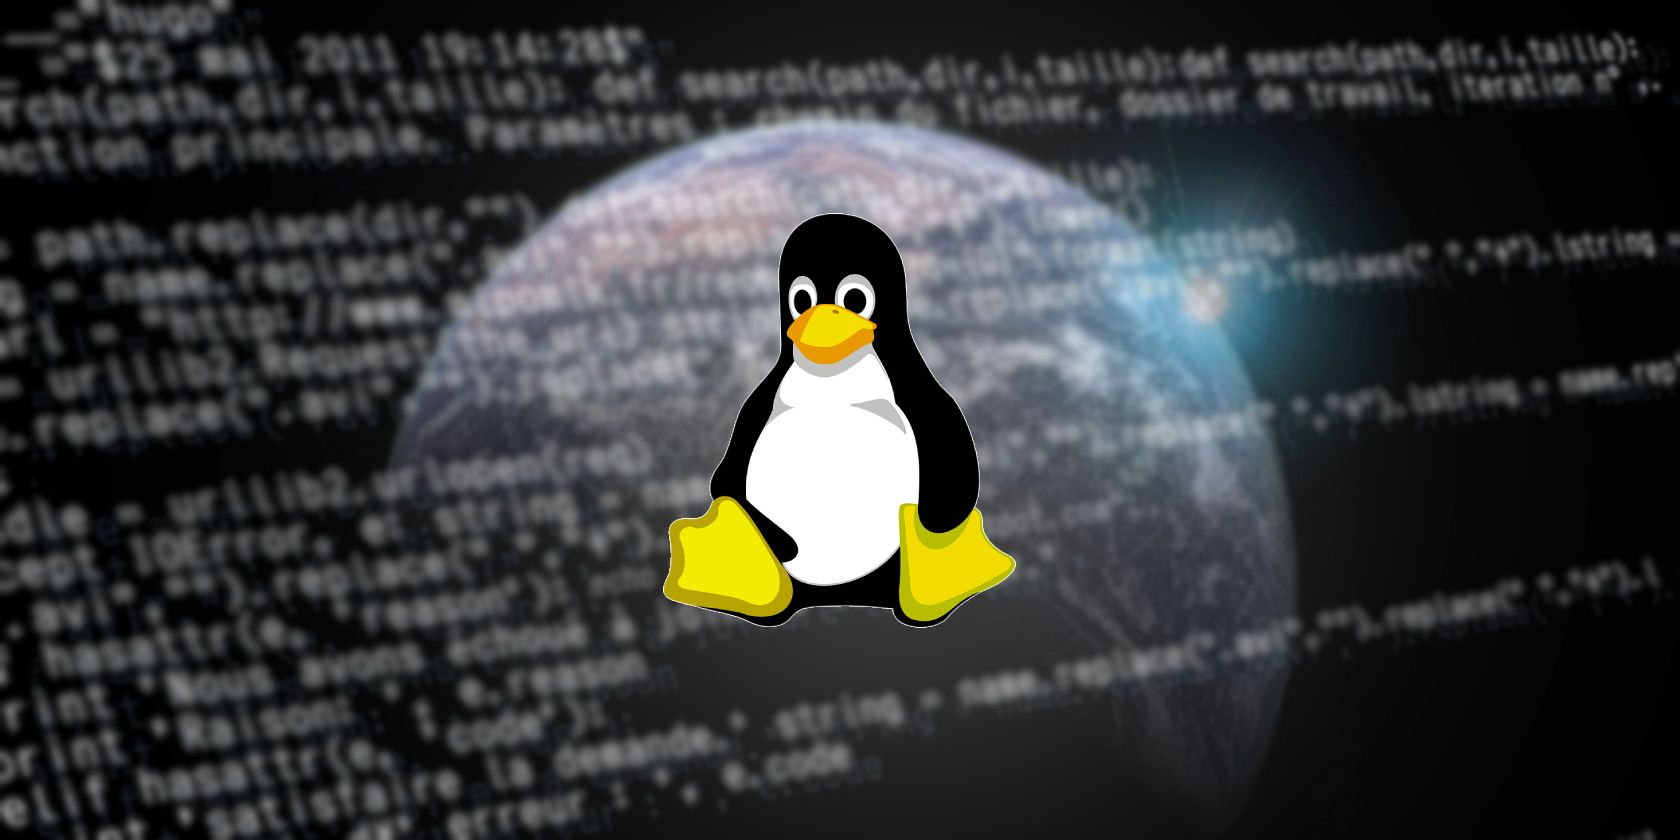 4 Ways to Shorten Linux Commands and Save Time